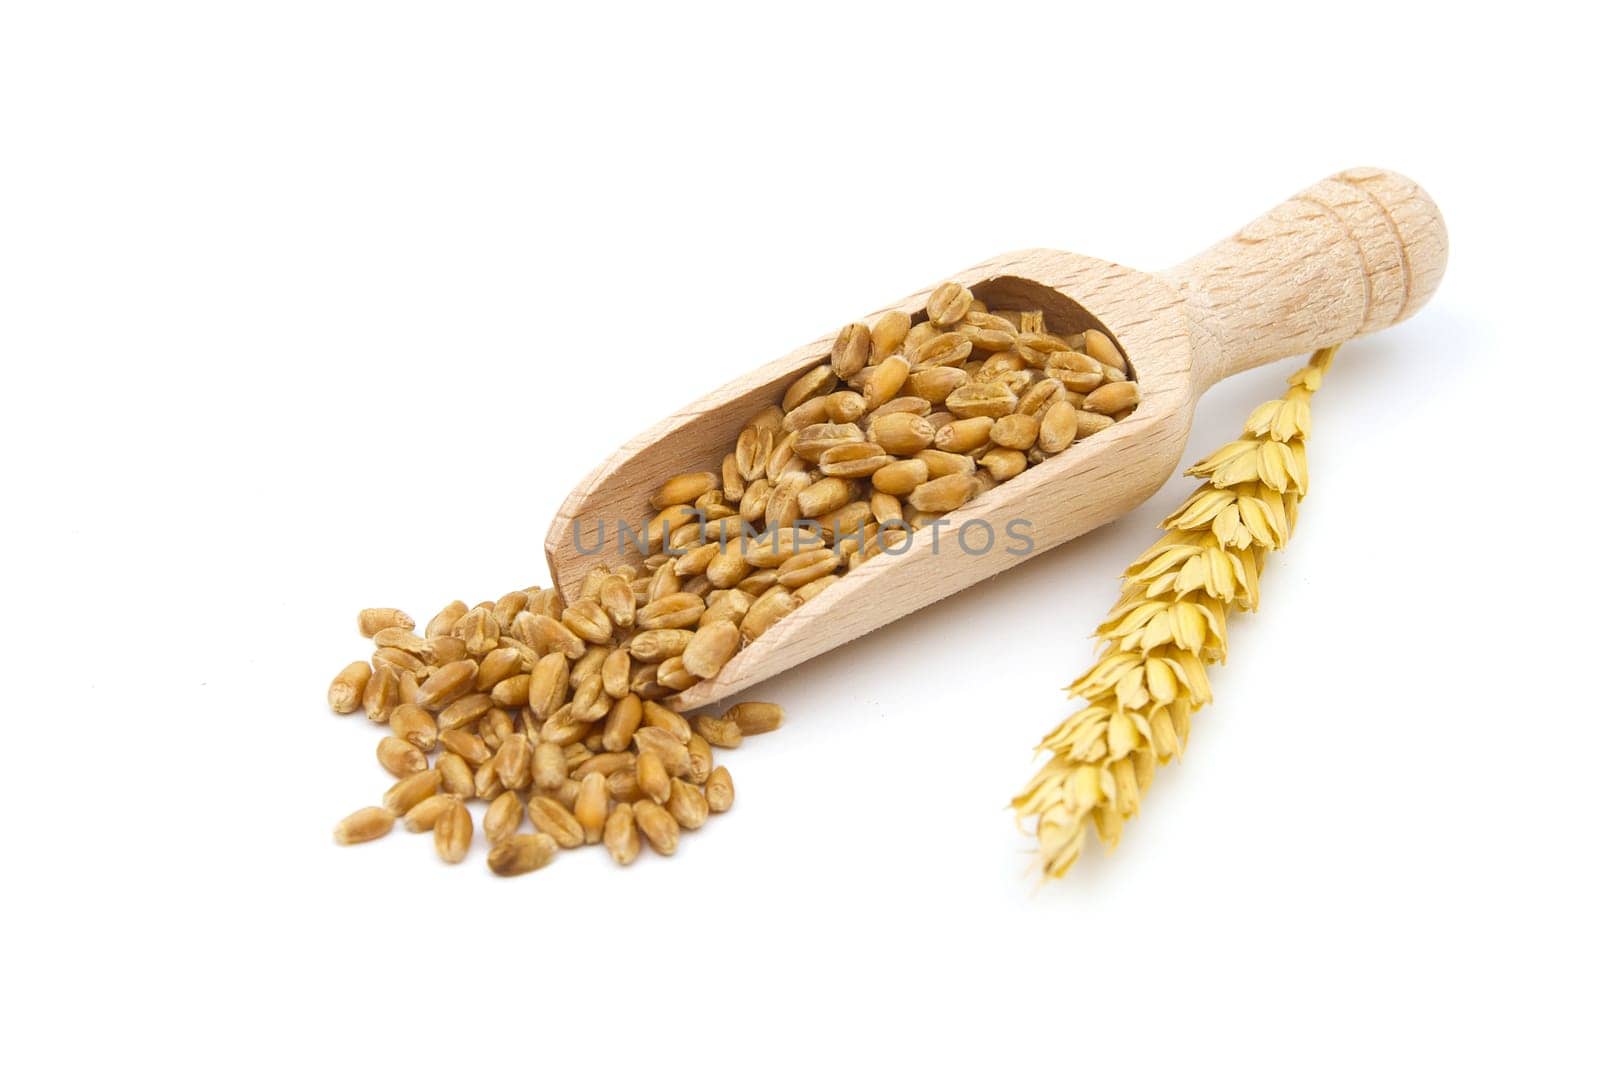 Wheat grain seeds spilling from wooden scoop near to ripe wheat ears over white background with selective focus